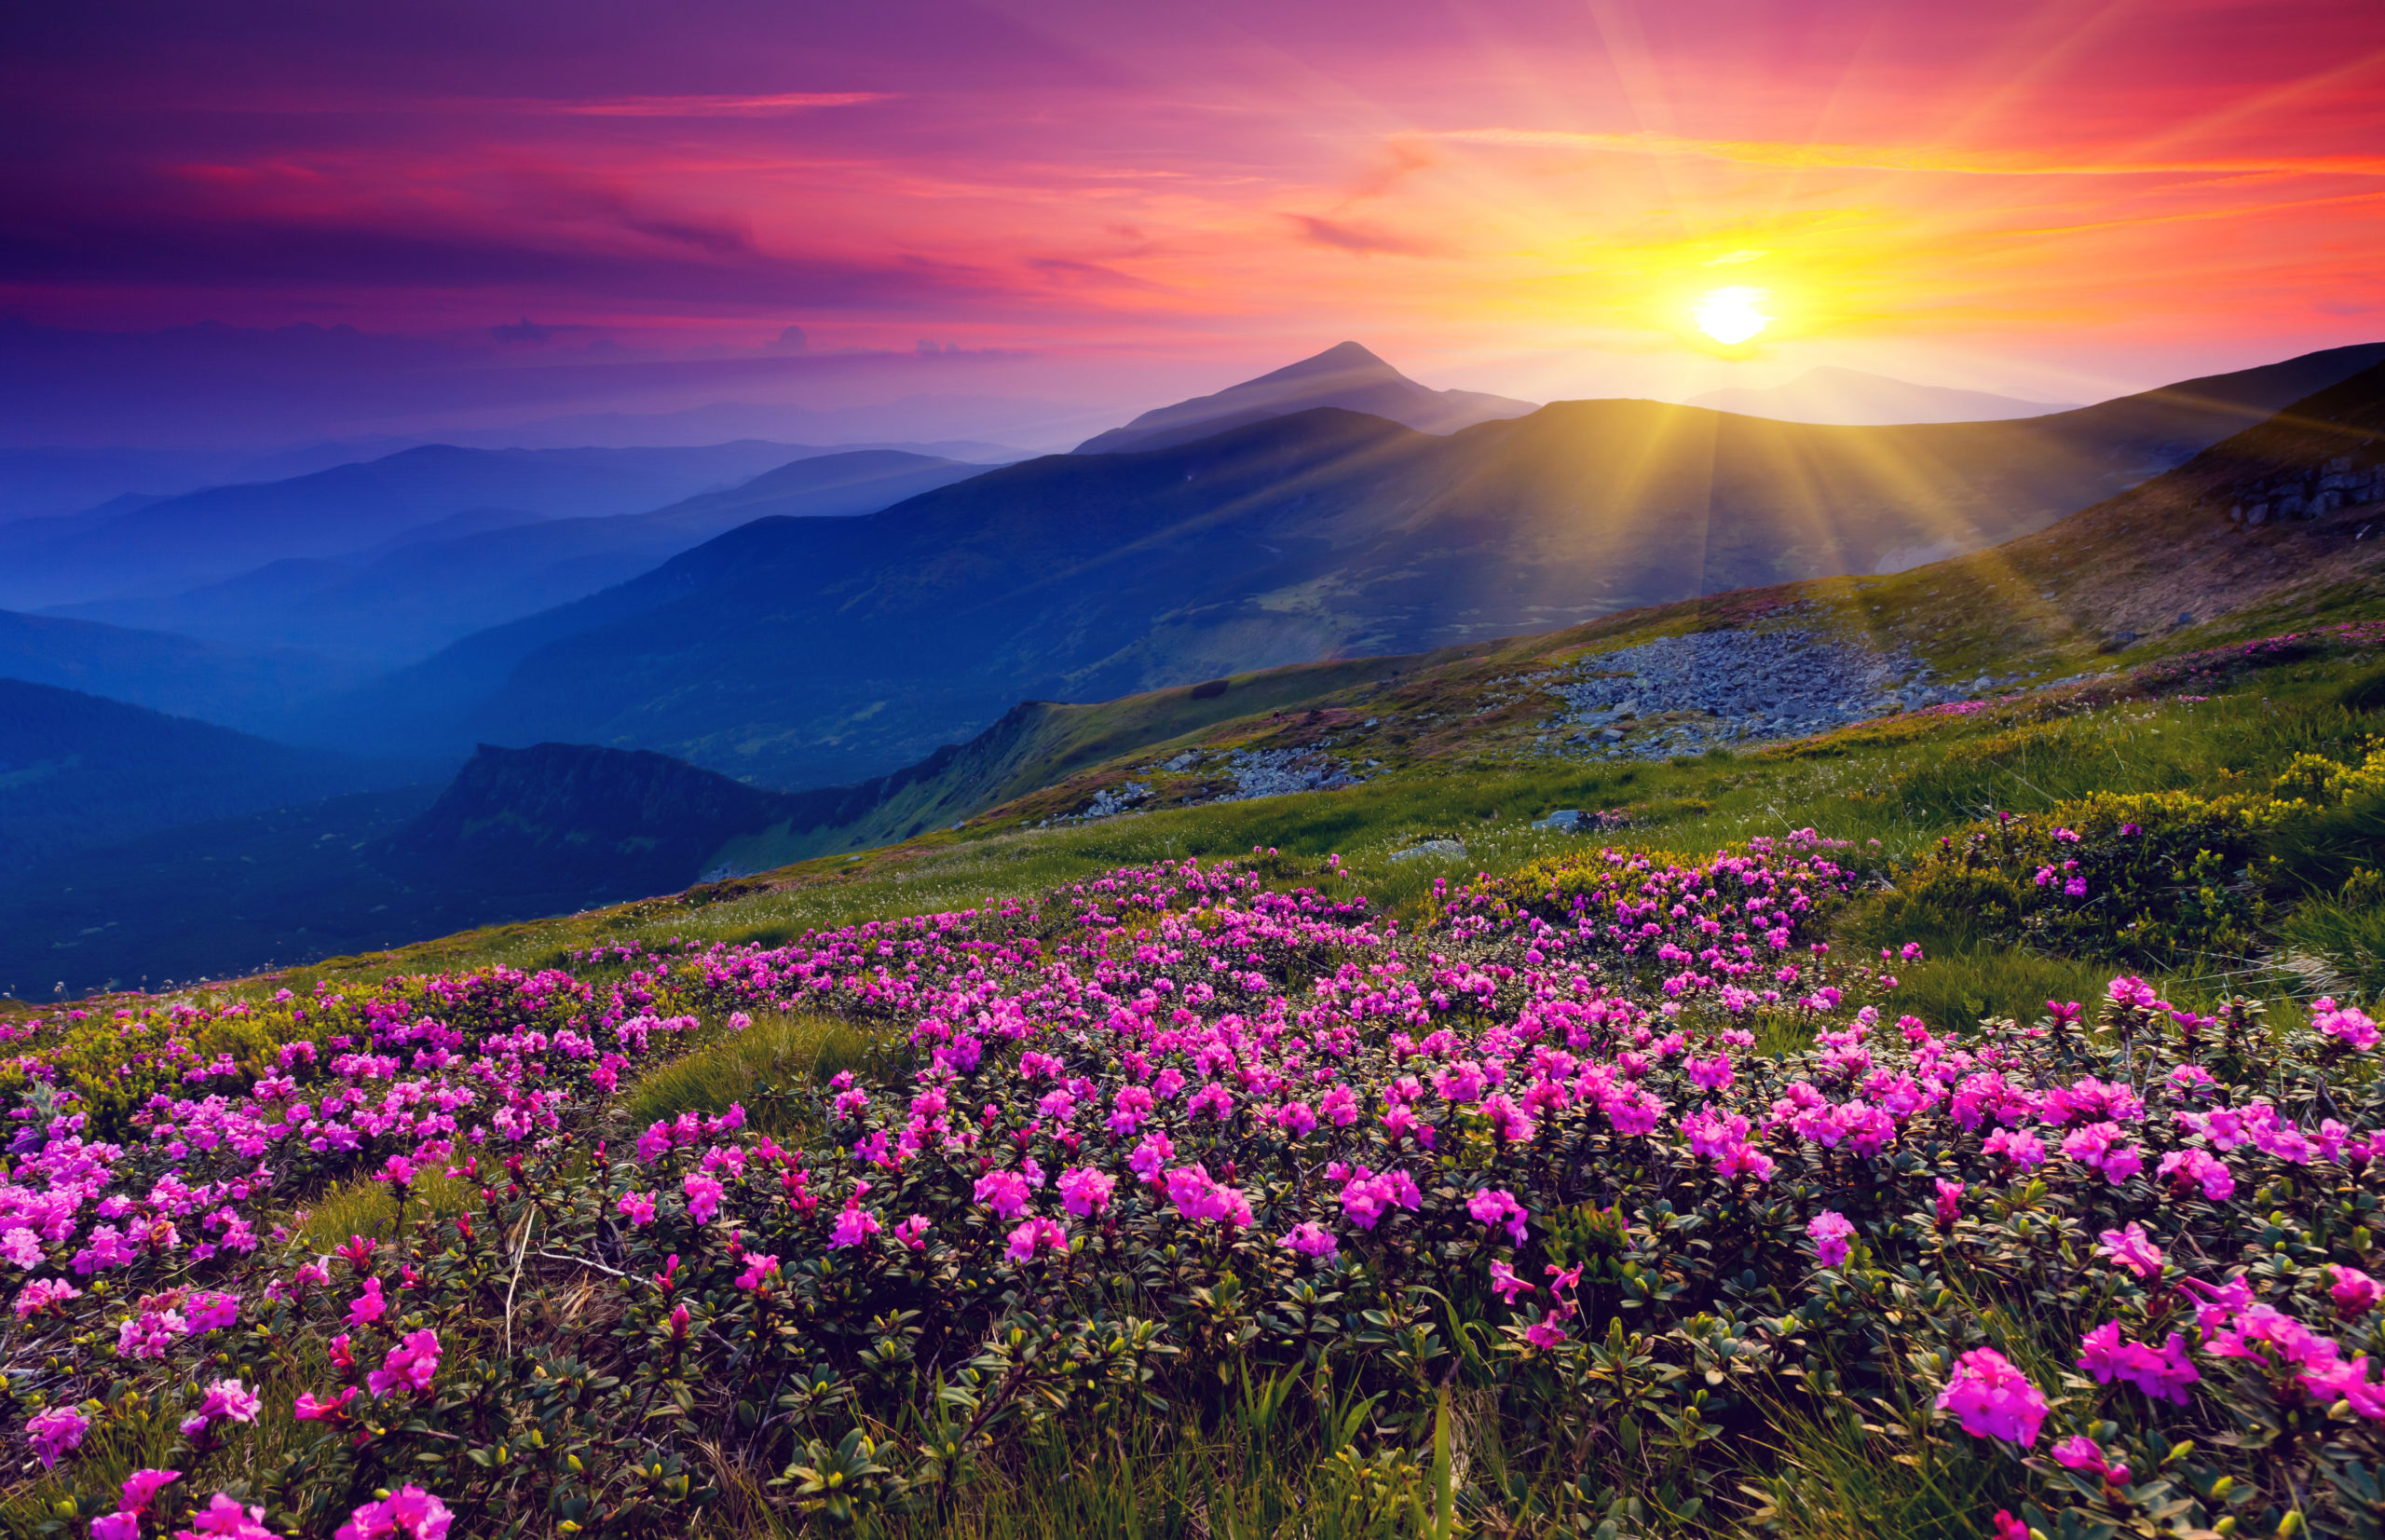 photo of a sunset over a mountain with a field of purple flowers in the foreground